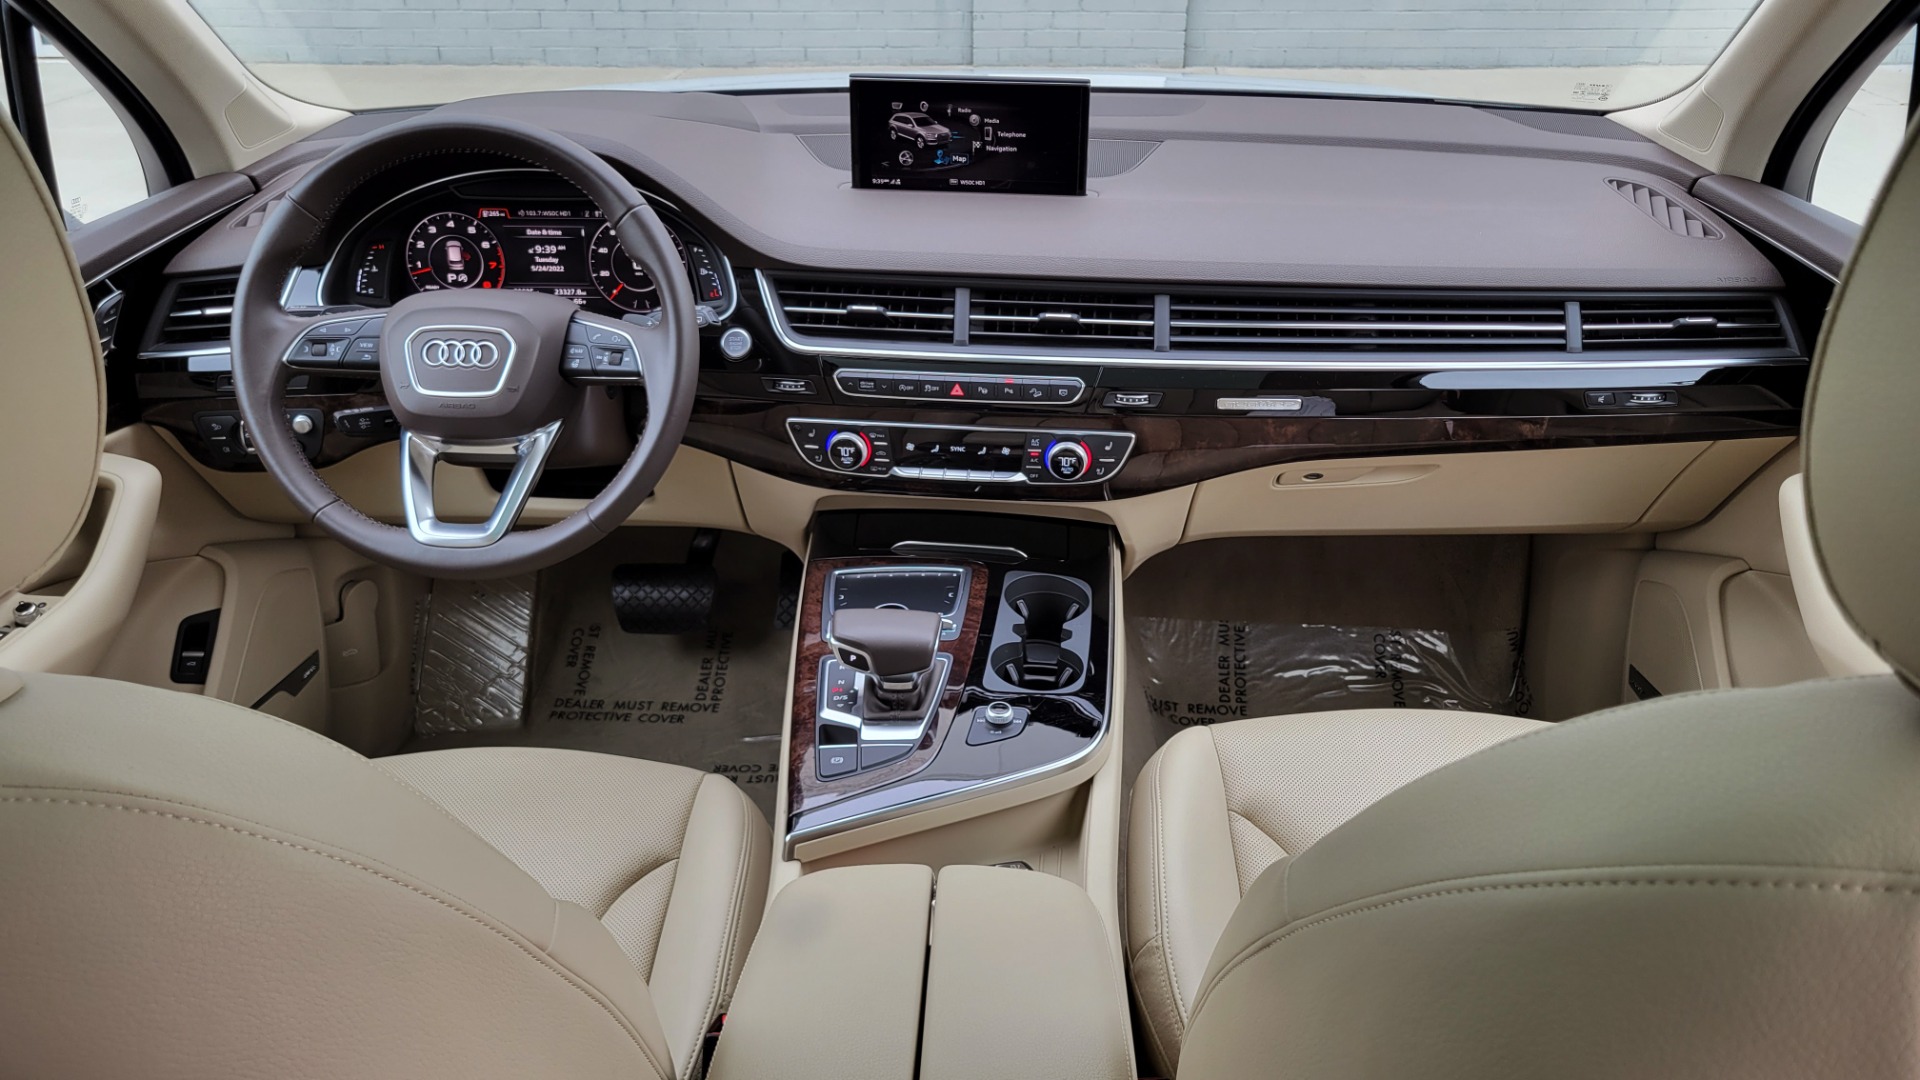 Used 2019 Audi Q7 PRESTIGE / CONV PKG / BOSE / HUD / CLD WTHR / TOWING / REARVIEW for sale $50,295 at Formula Imports in Charlotte NC 28227 98